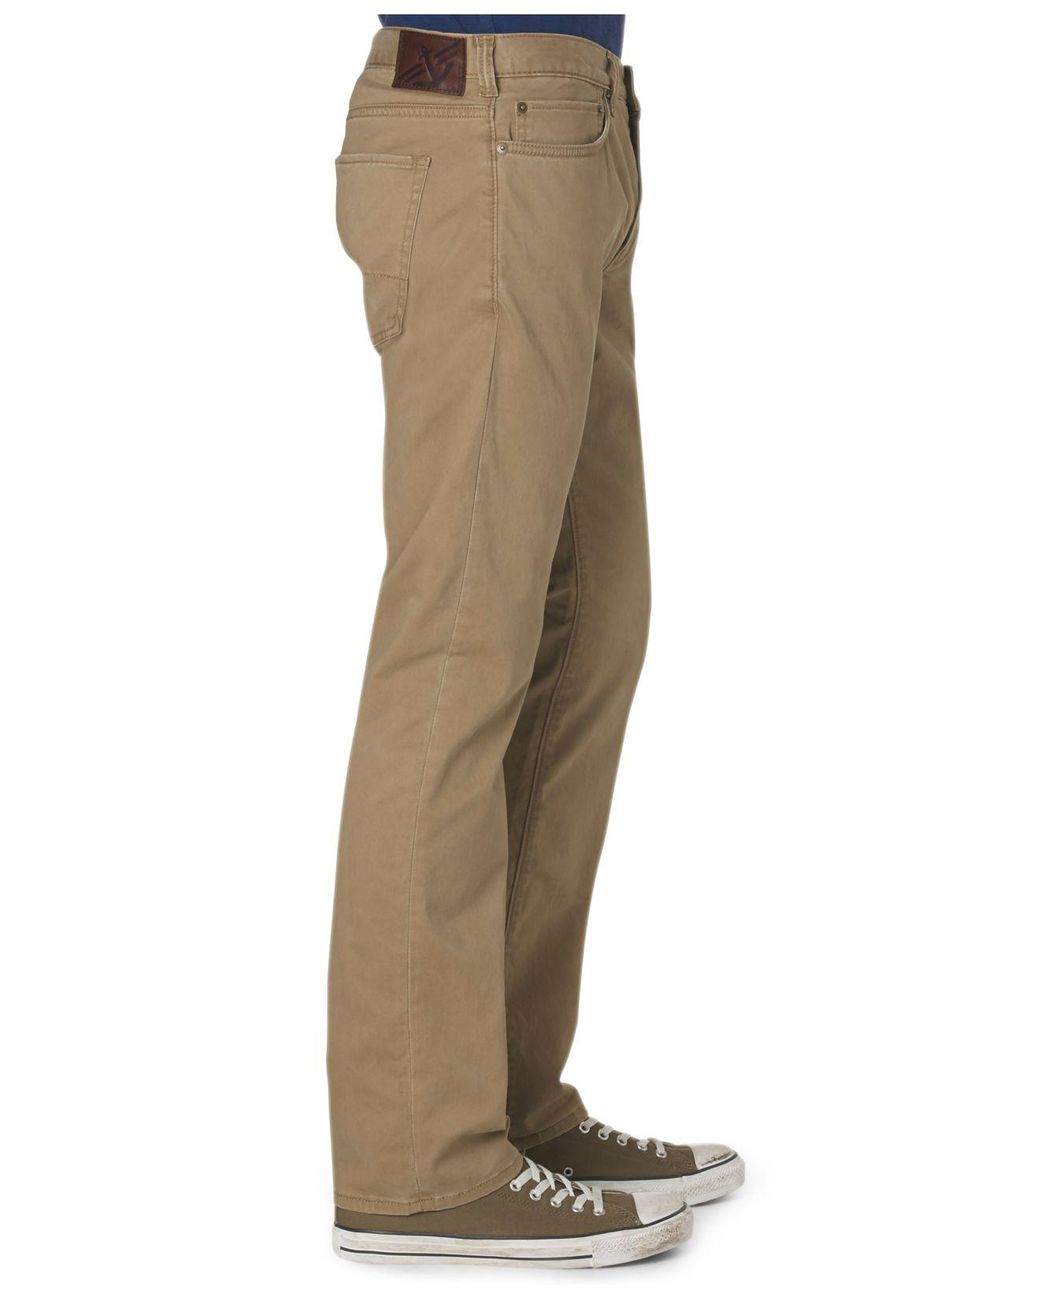 Dockers ~ The Jean Cut Straight Fit Men's 38x29 Casual Pants $58 NWT 